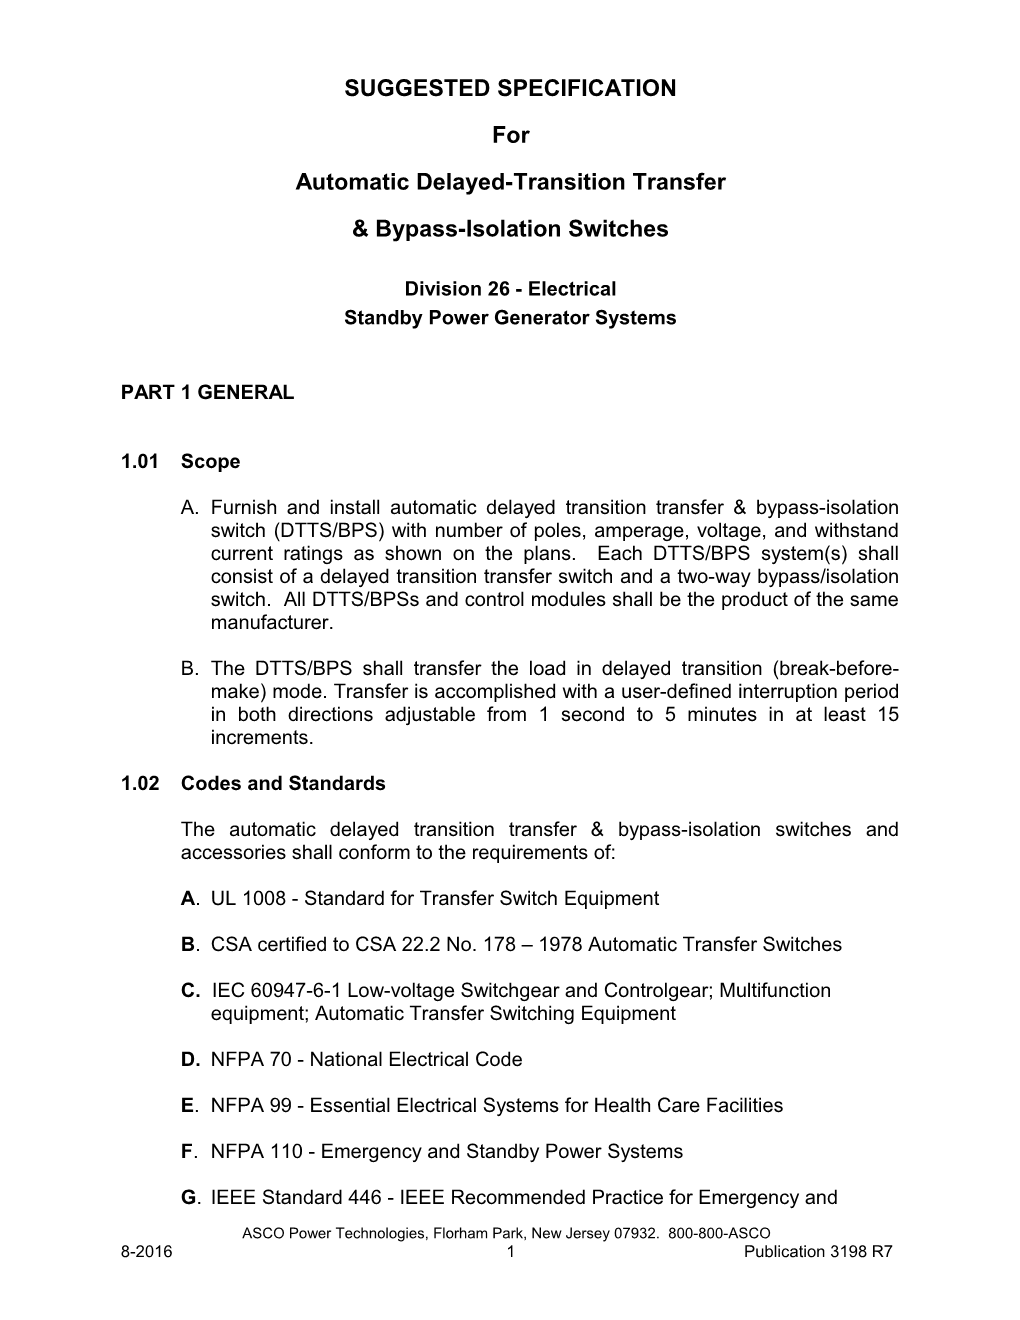 ASCO 7000 Series SUGGESTED SPECIFICATION for Automatic Delayed-Transition Transfer &